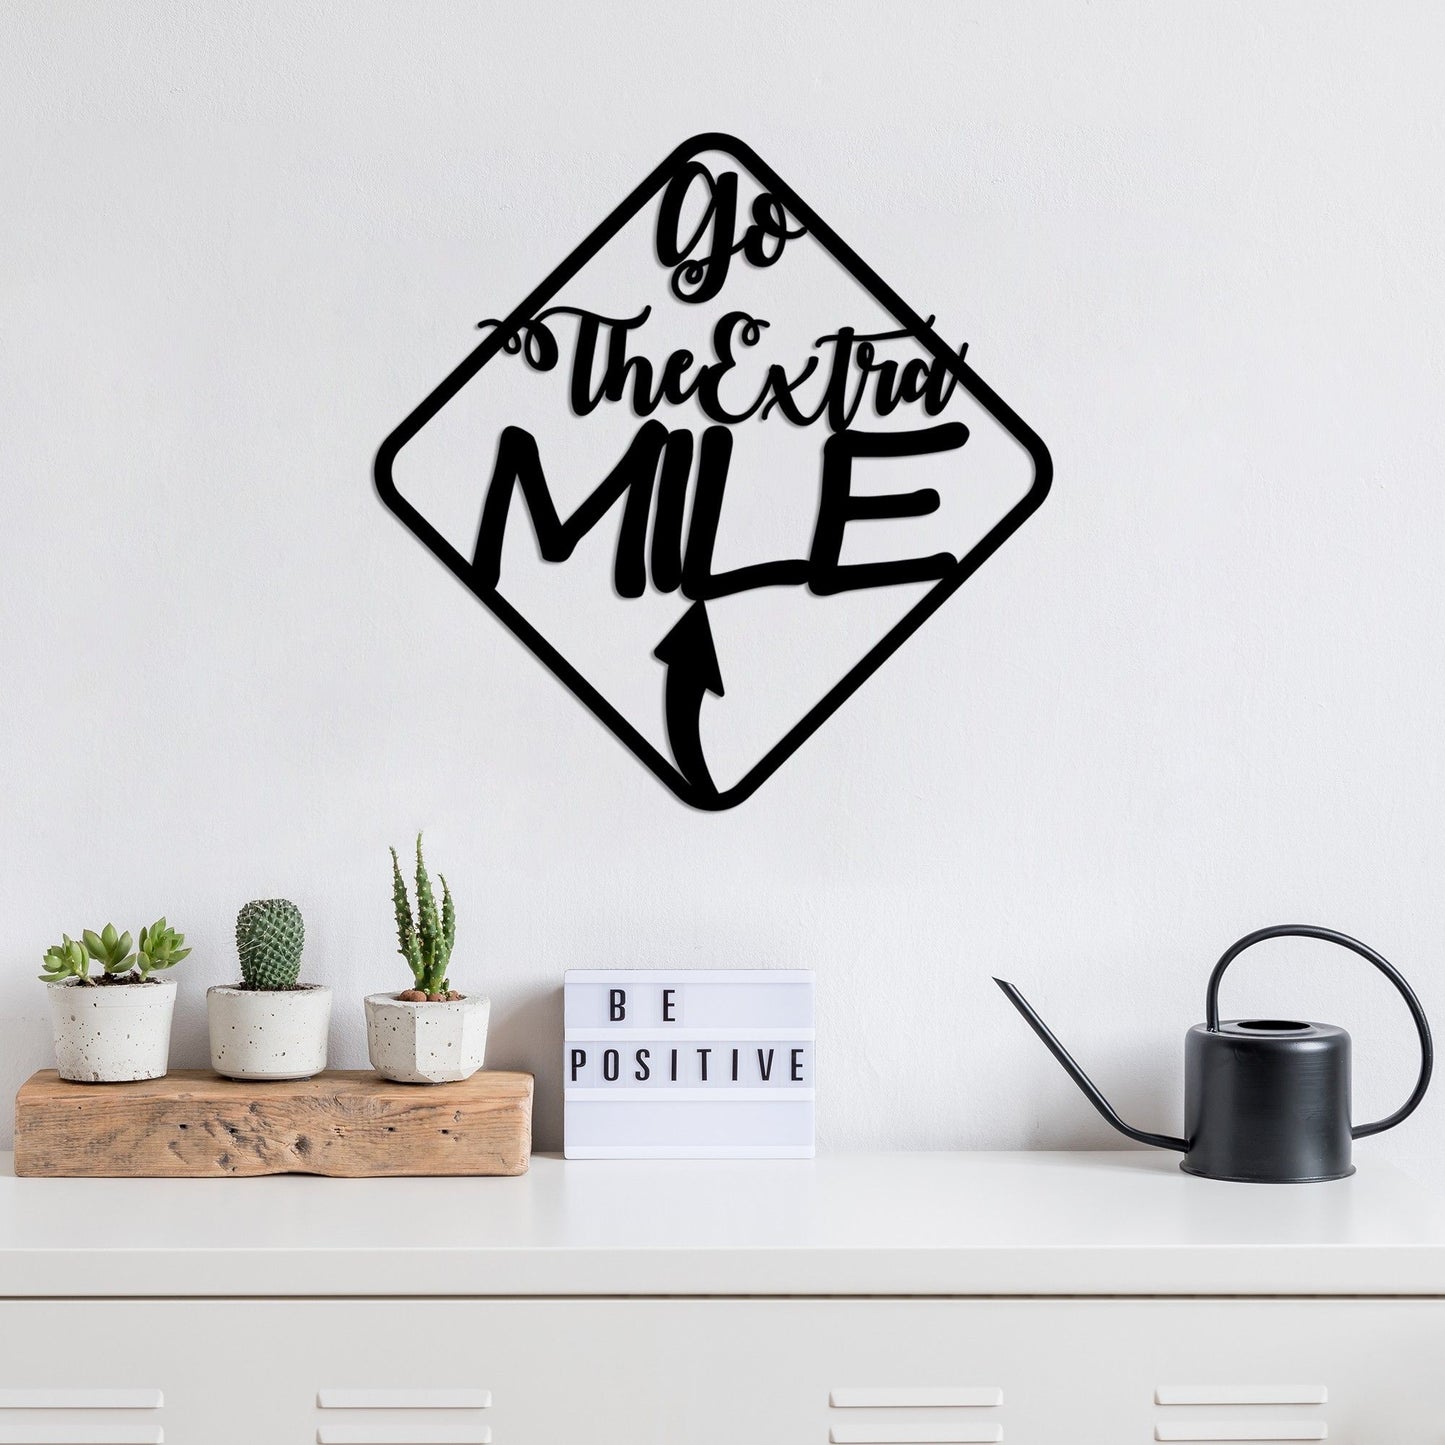 Go The Extra Mile - Decorative Metal Wall Accessory